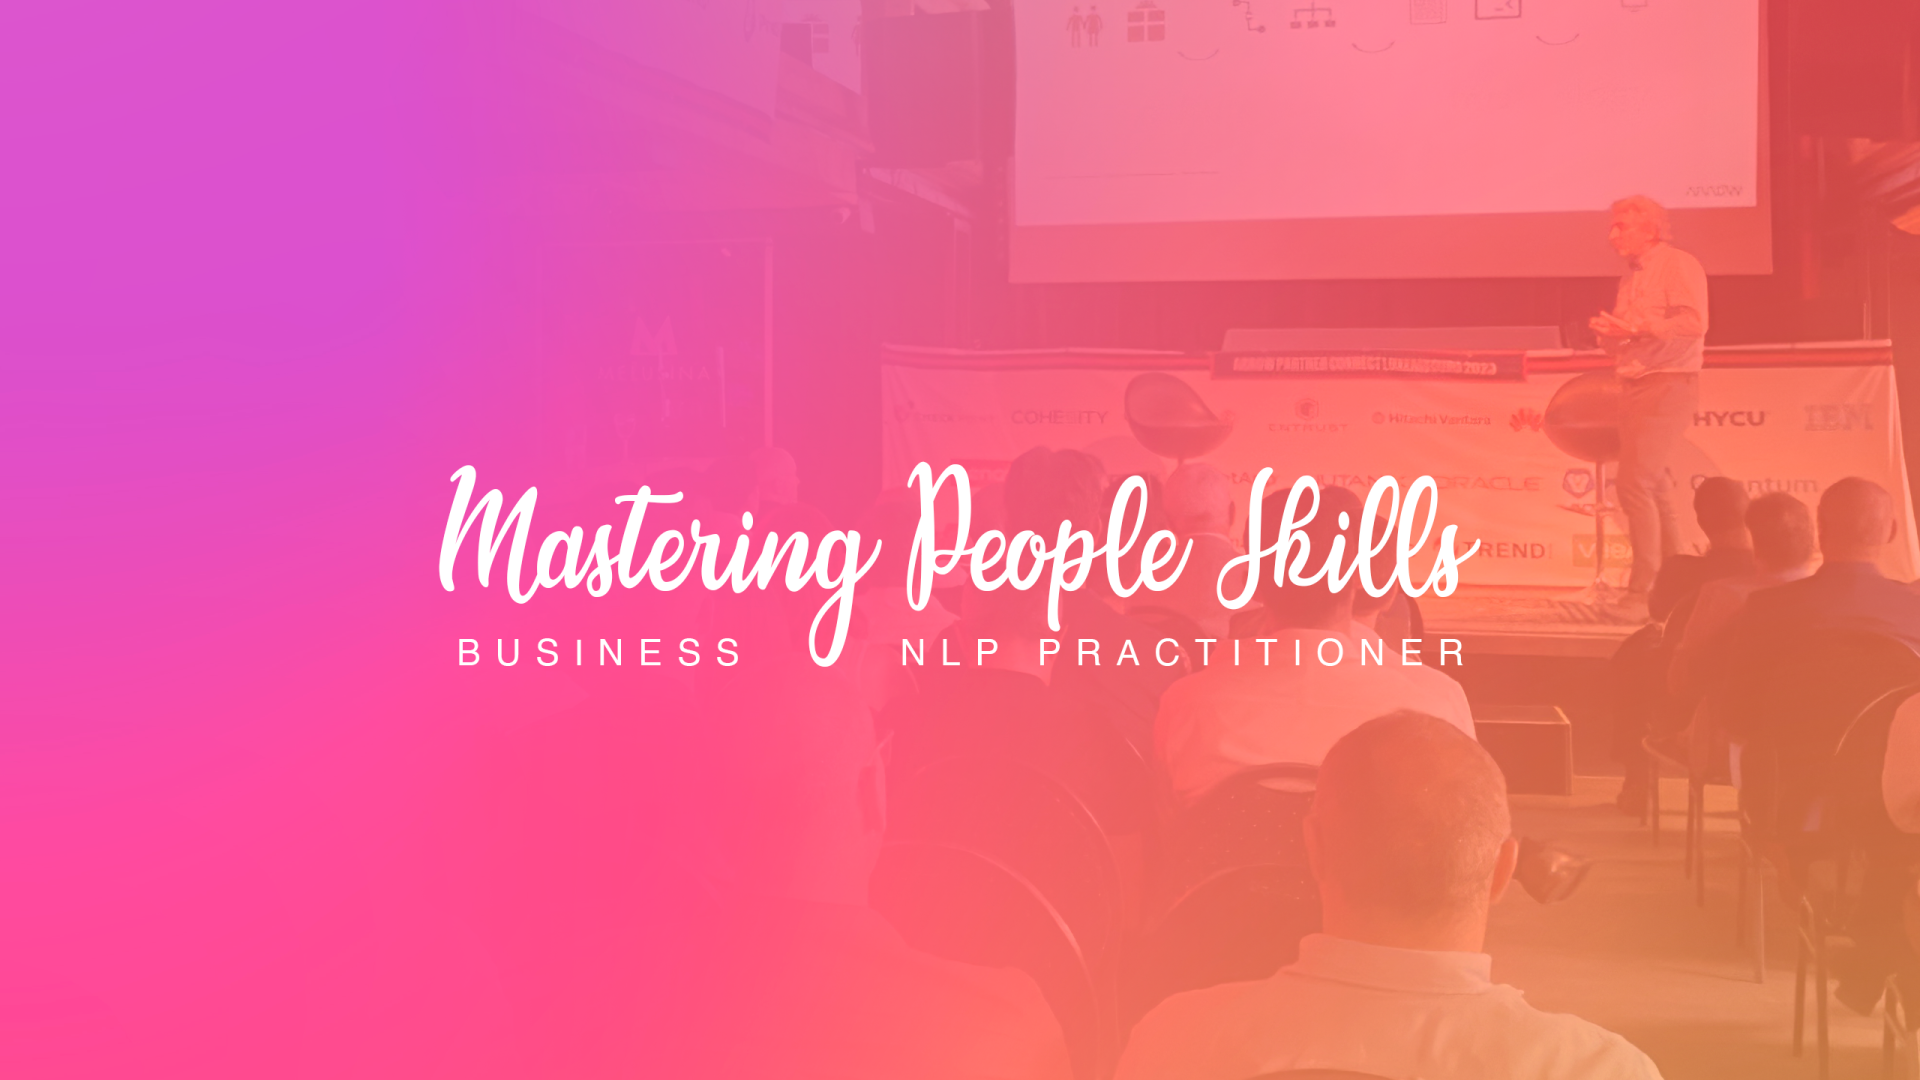 Mastering People Skills with NLP